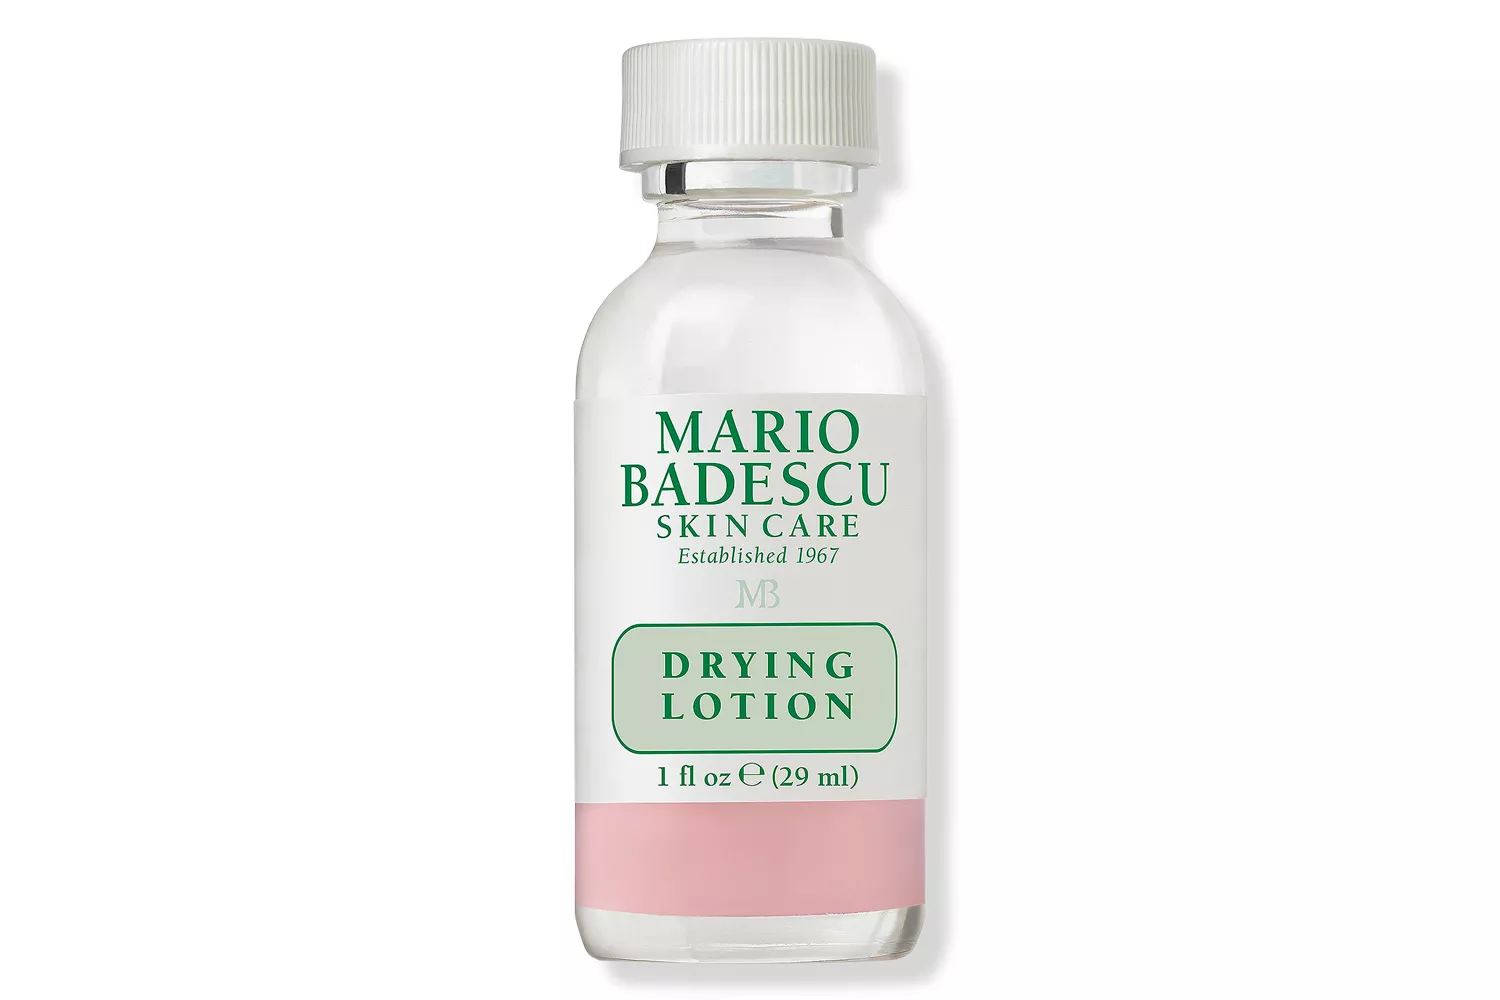 The Best Budget Acne Treatments: Mario Badescu Drying Lotion